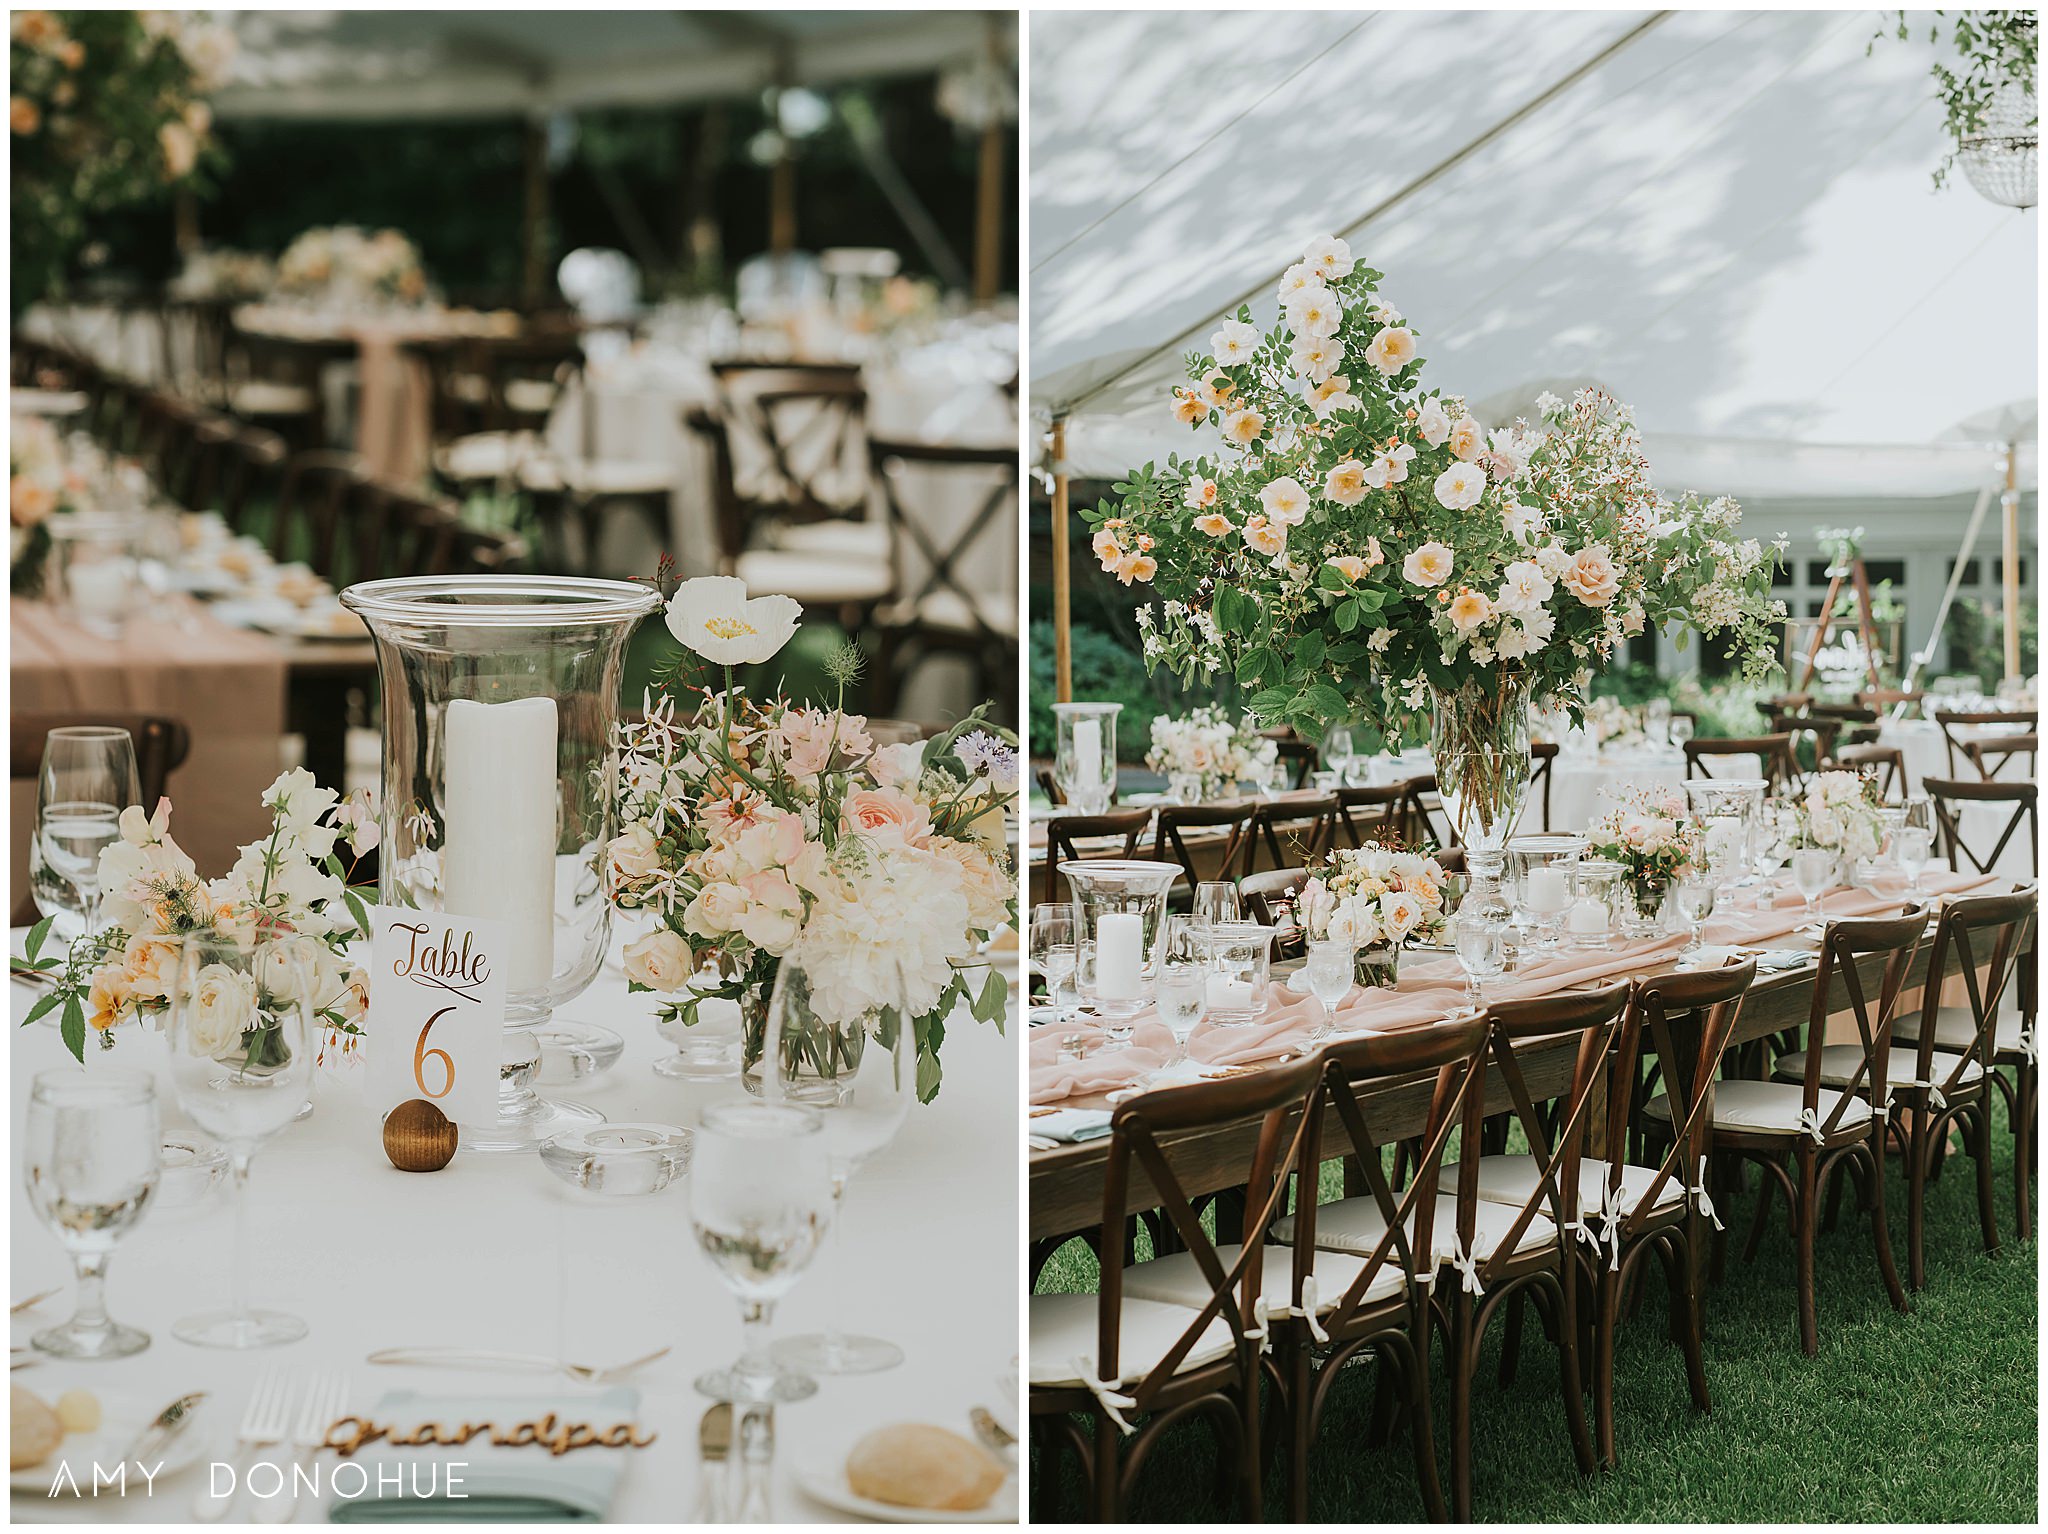 Reception details by Birds of a Flower with Simon Pearce Glassware | Woodstock Vermont Wedding Photographer | © Amy Donohue Photography